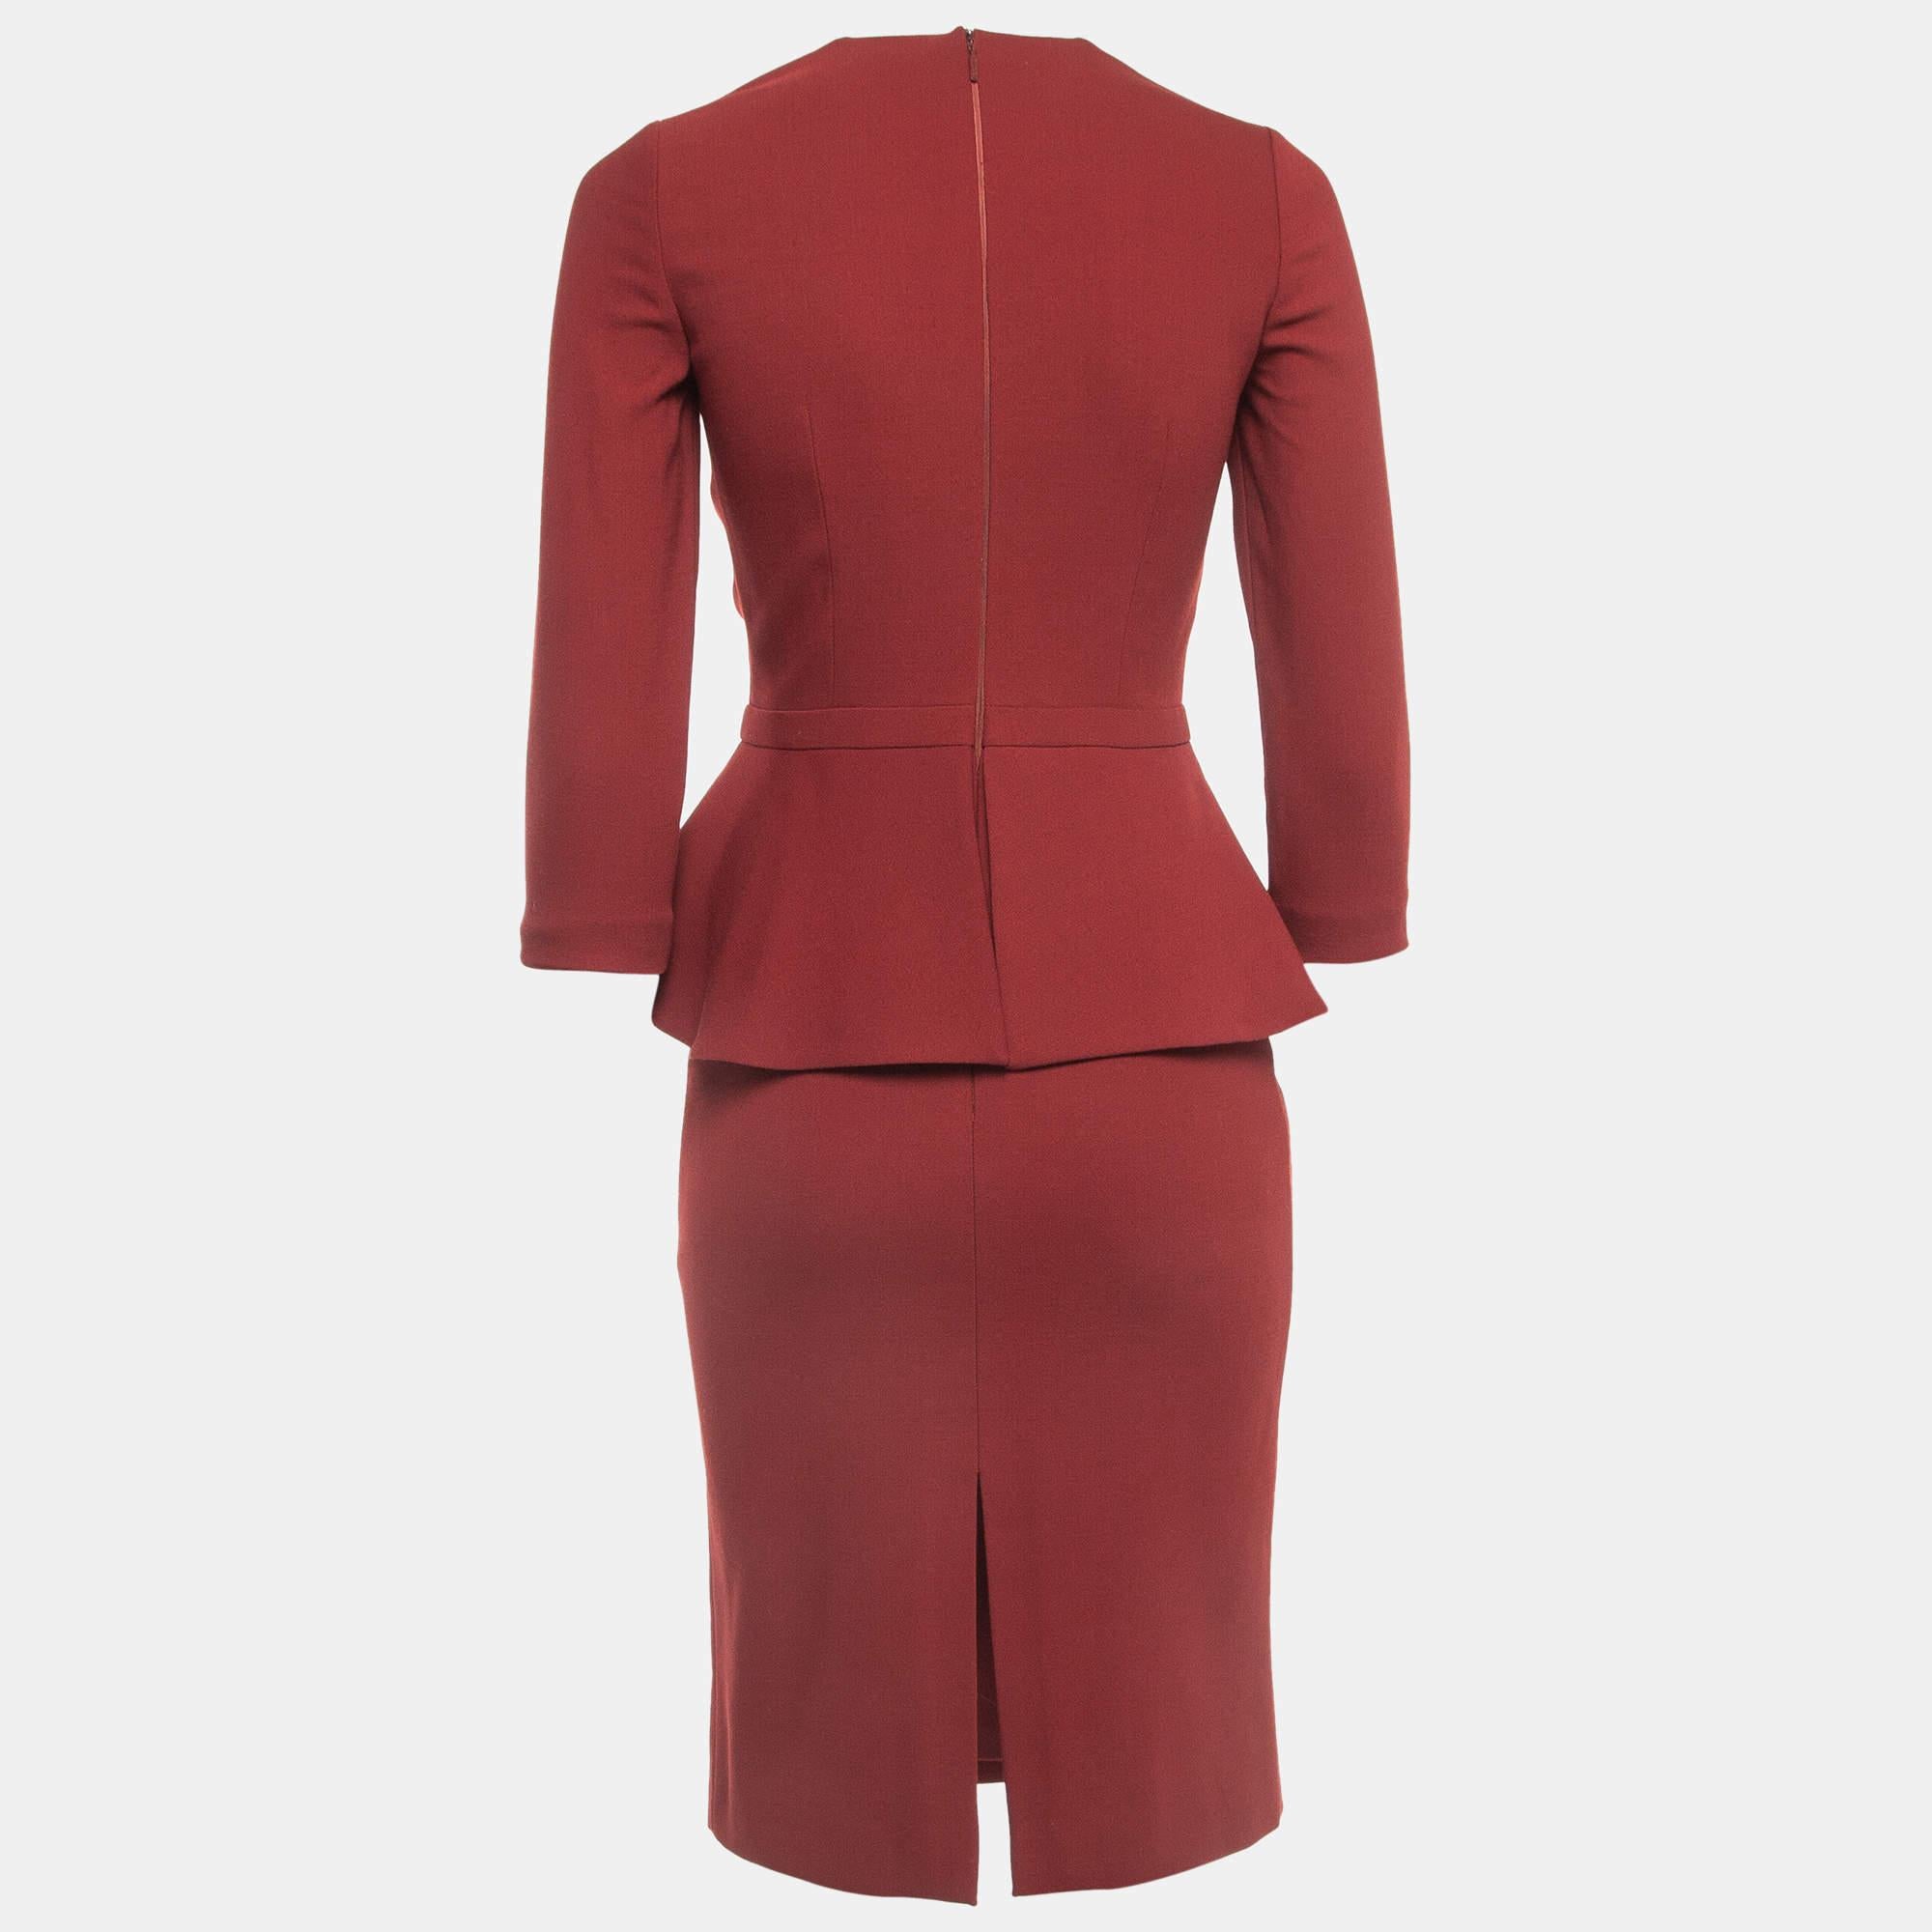 Effortlessly made into a chic design, this Gucci red midi dress is easy to wear and easy to accessorize. Tailored beautifully, the dress is sure to remain a favorite season after season.

